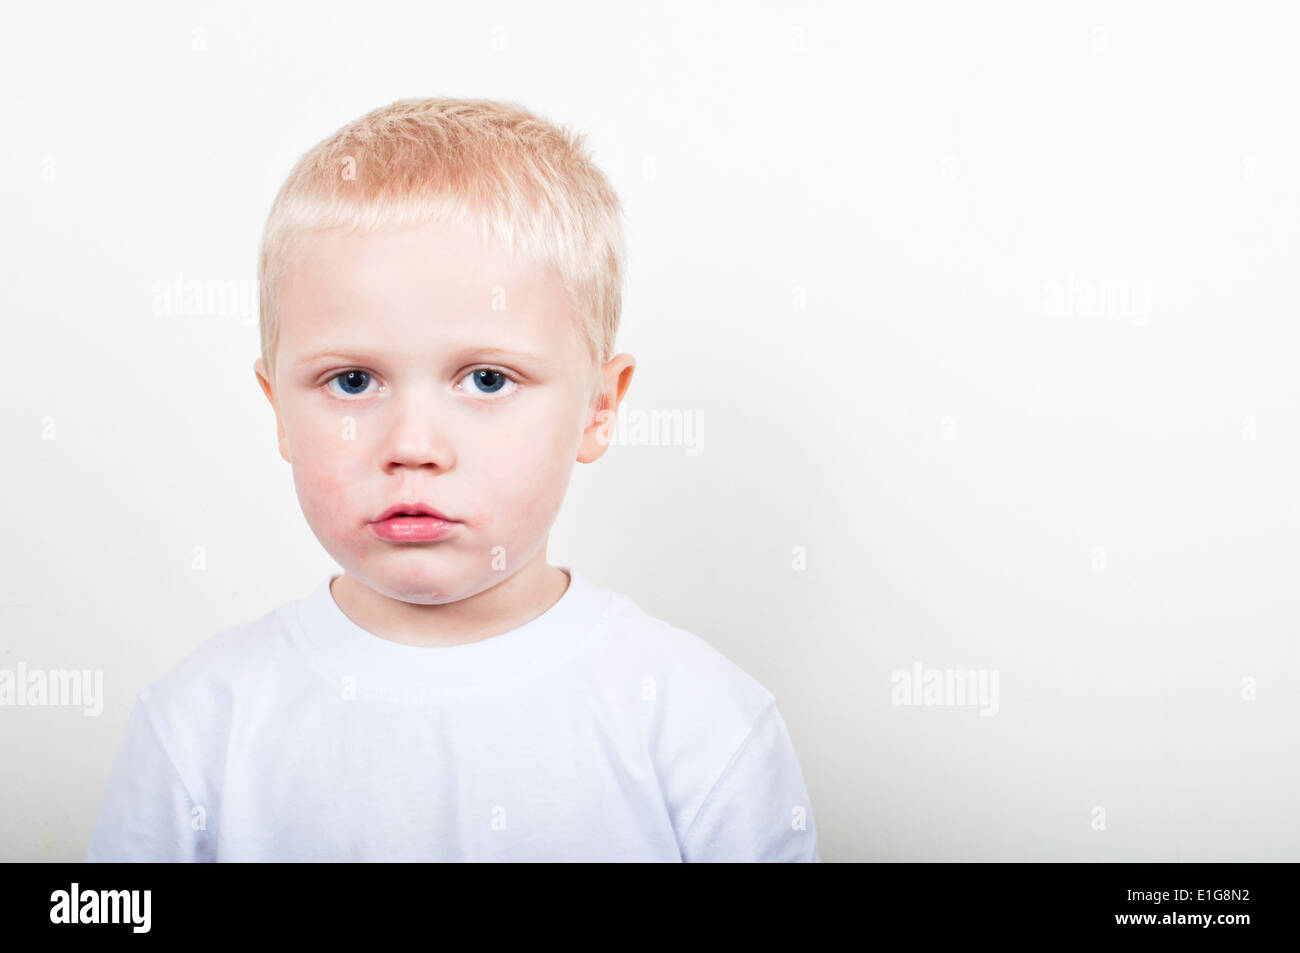 Sad faced little boy with an unhappy expression Stock Photo